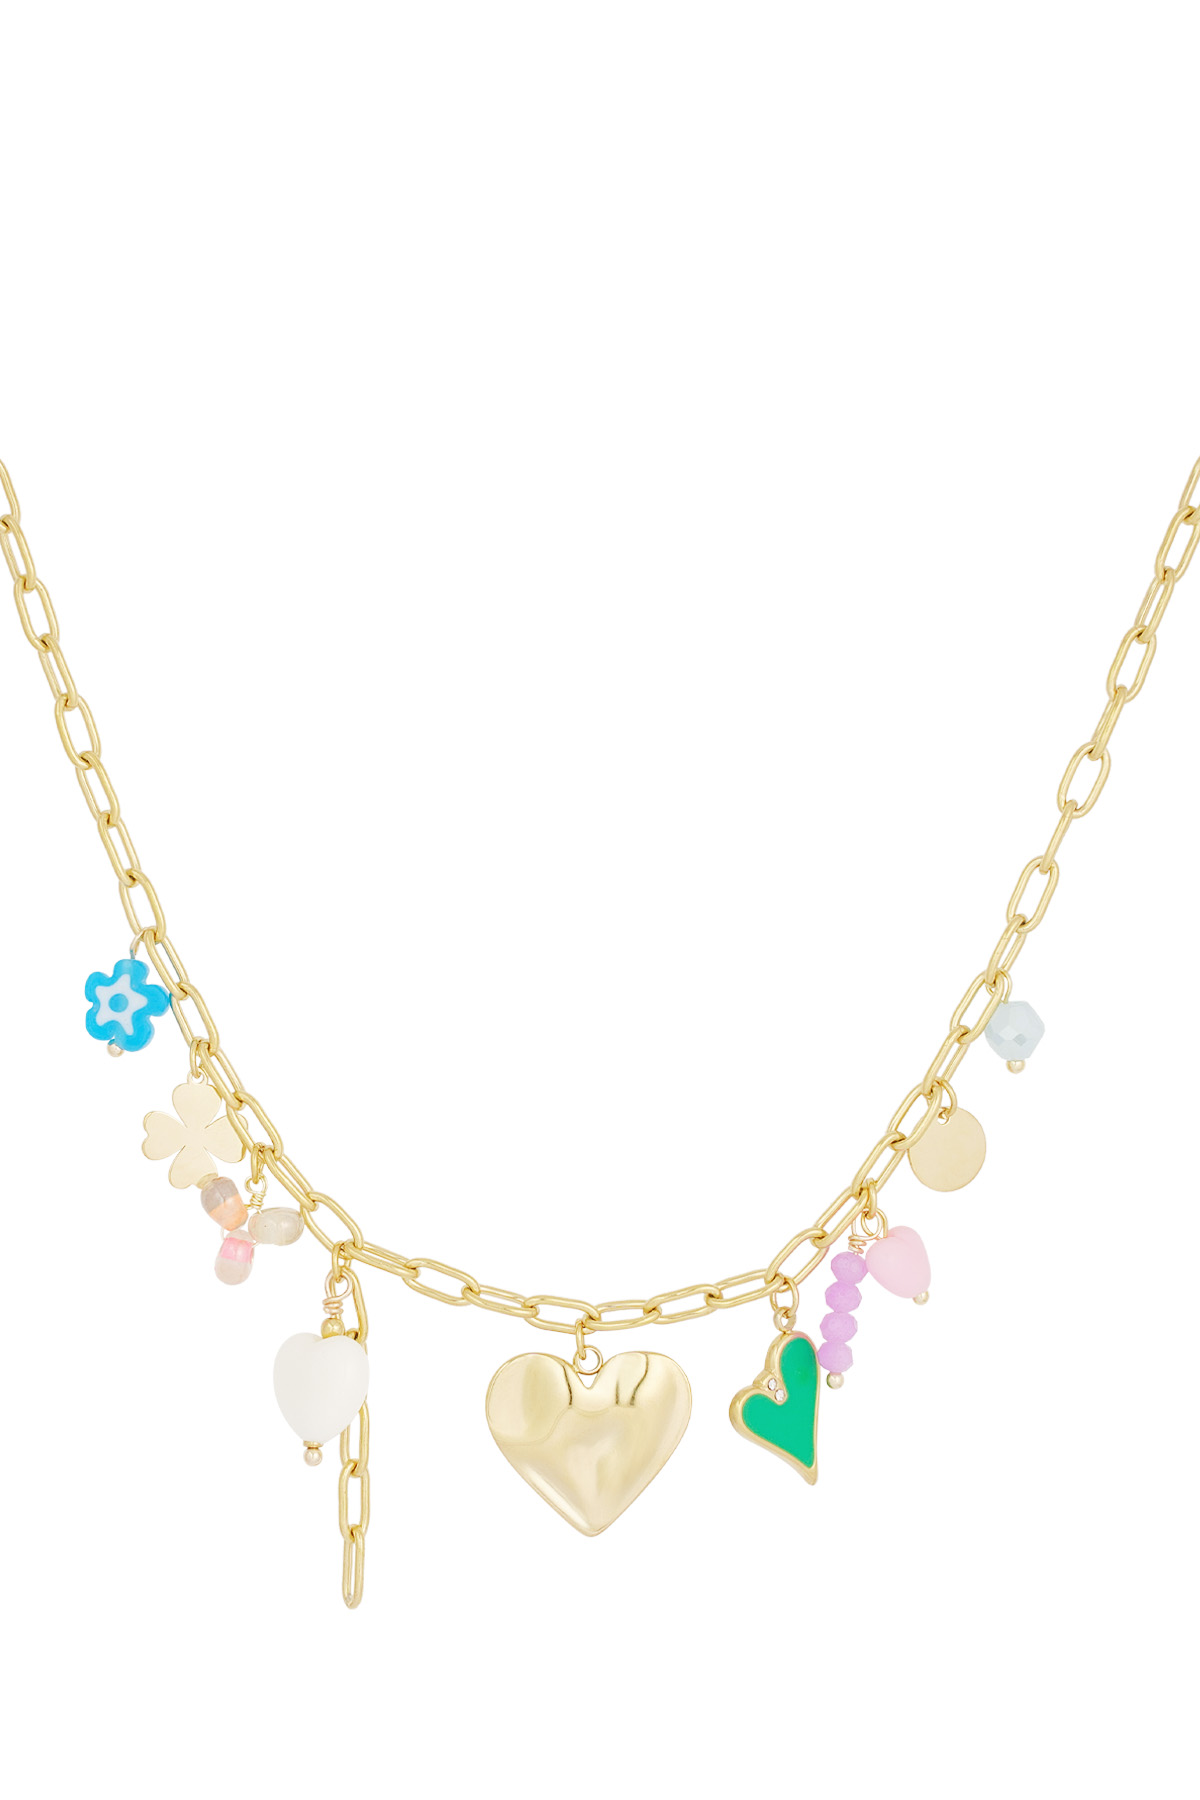 charm necklace with colored charms - gold h5 